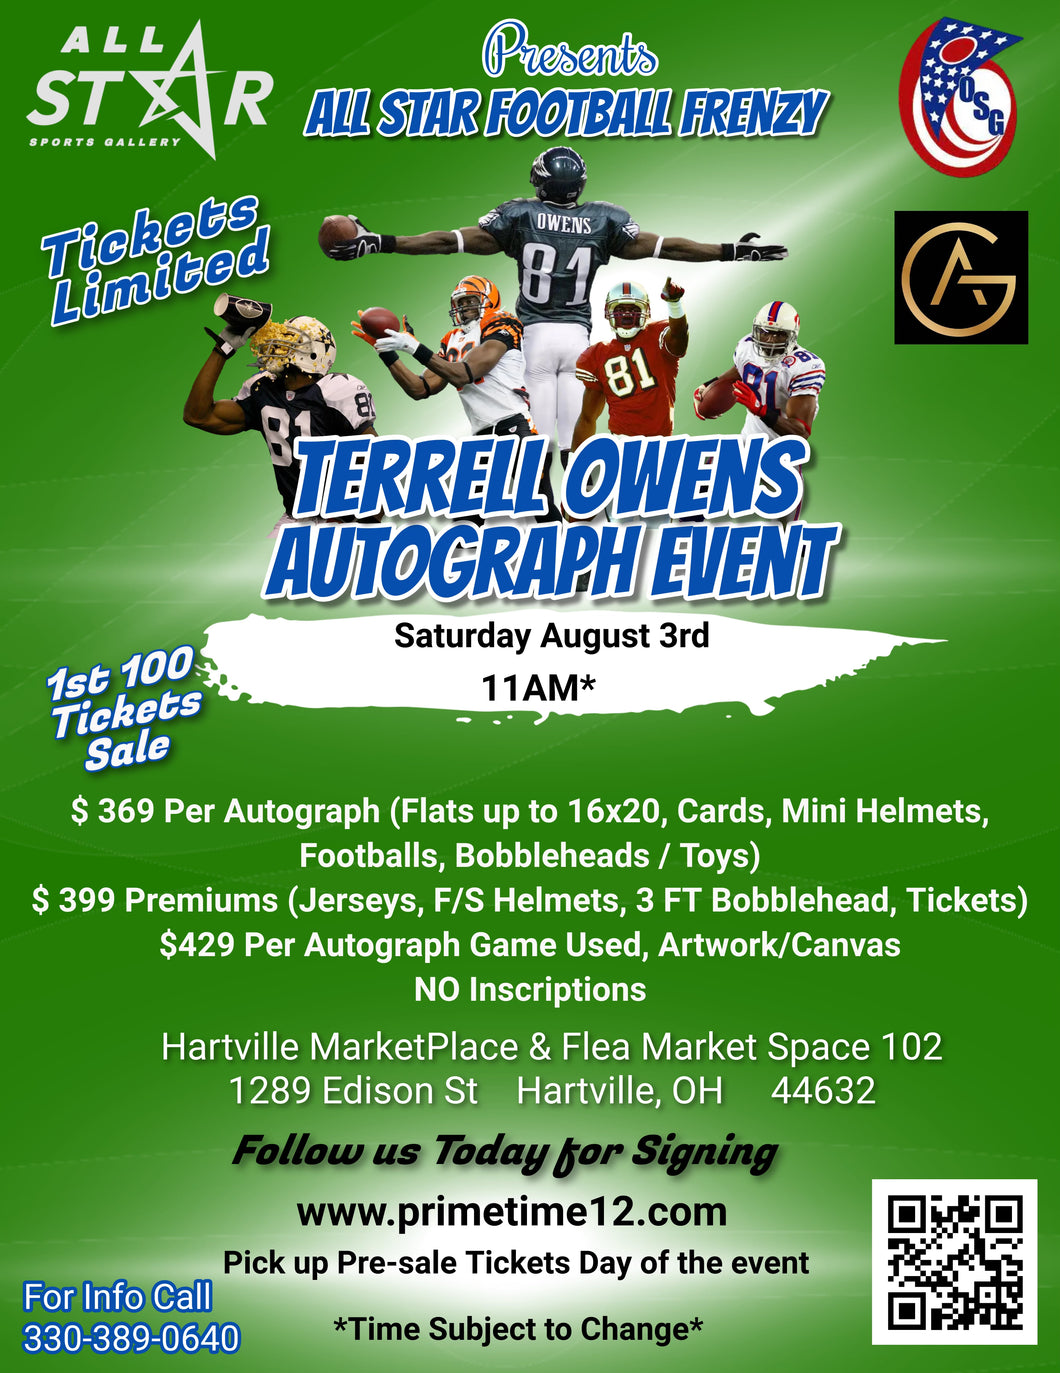 Terrell Owens Pre-Sale ticket for autograph signing on Game-Used Item, Artwork, or Canvas